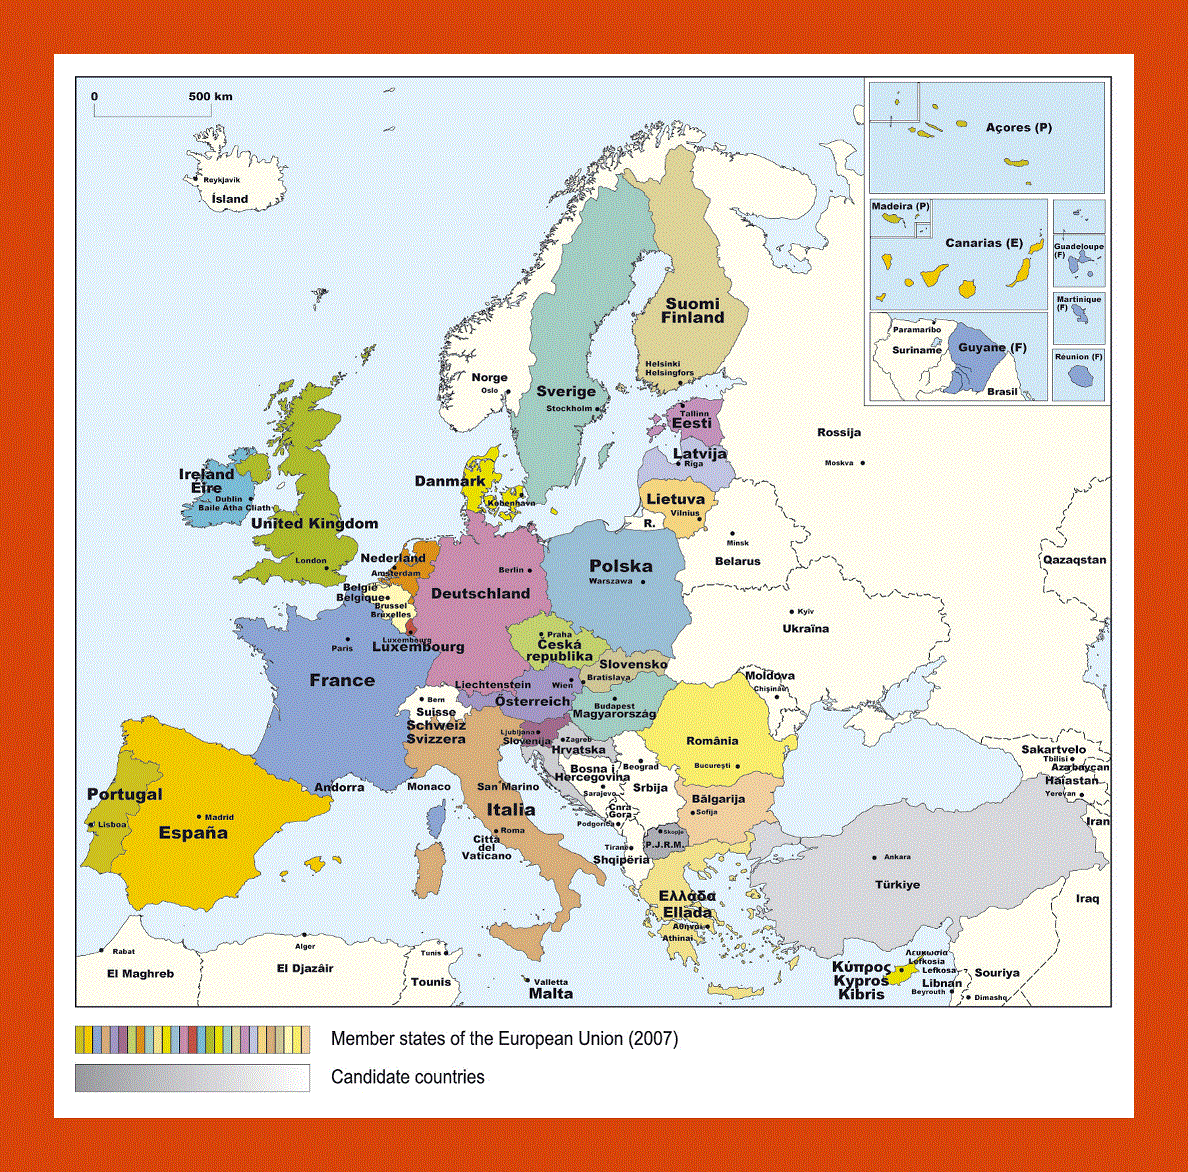 Map of Member States of the European Union - 2007